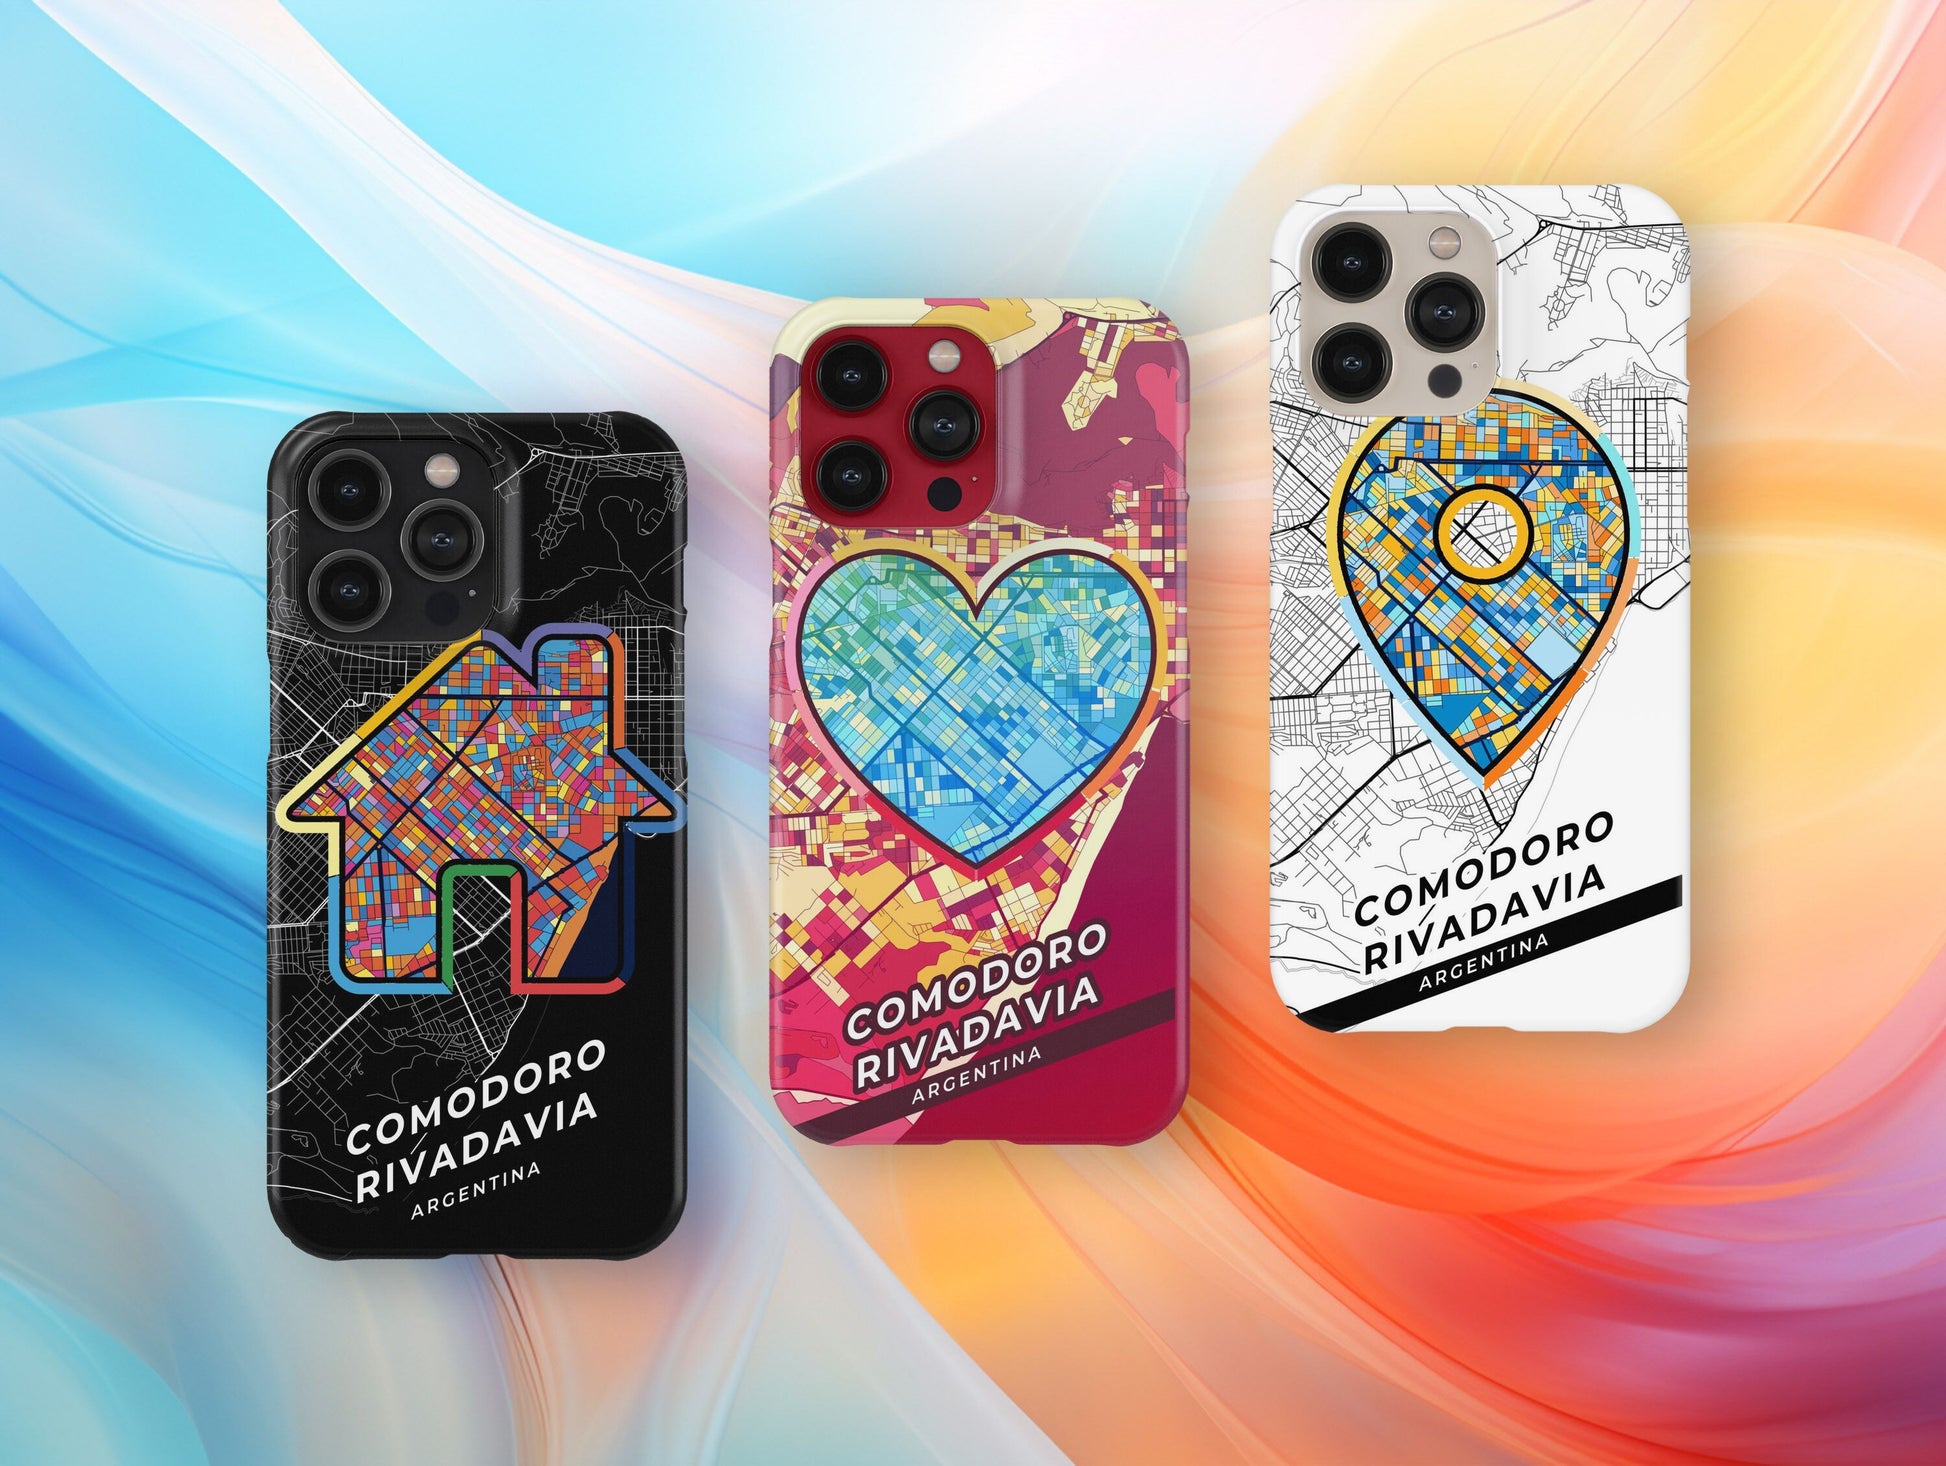 Comodoro Rivadavia Argentina slim phone case with colorful icon. Birthday, wedding or housewarming gift. Couple match cases.